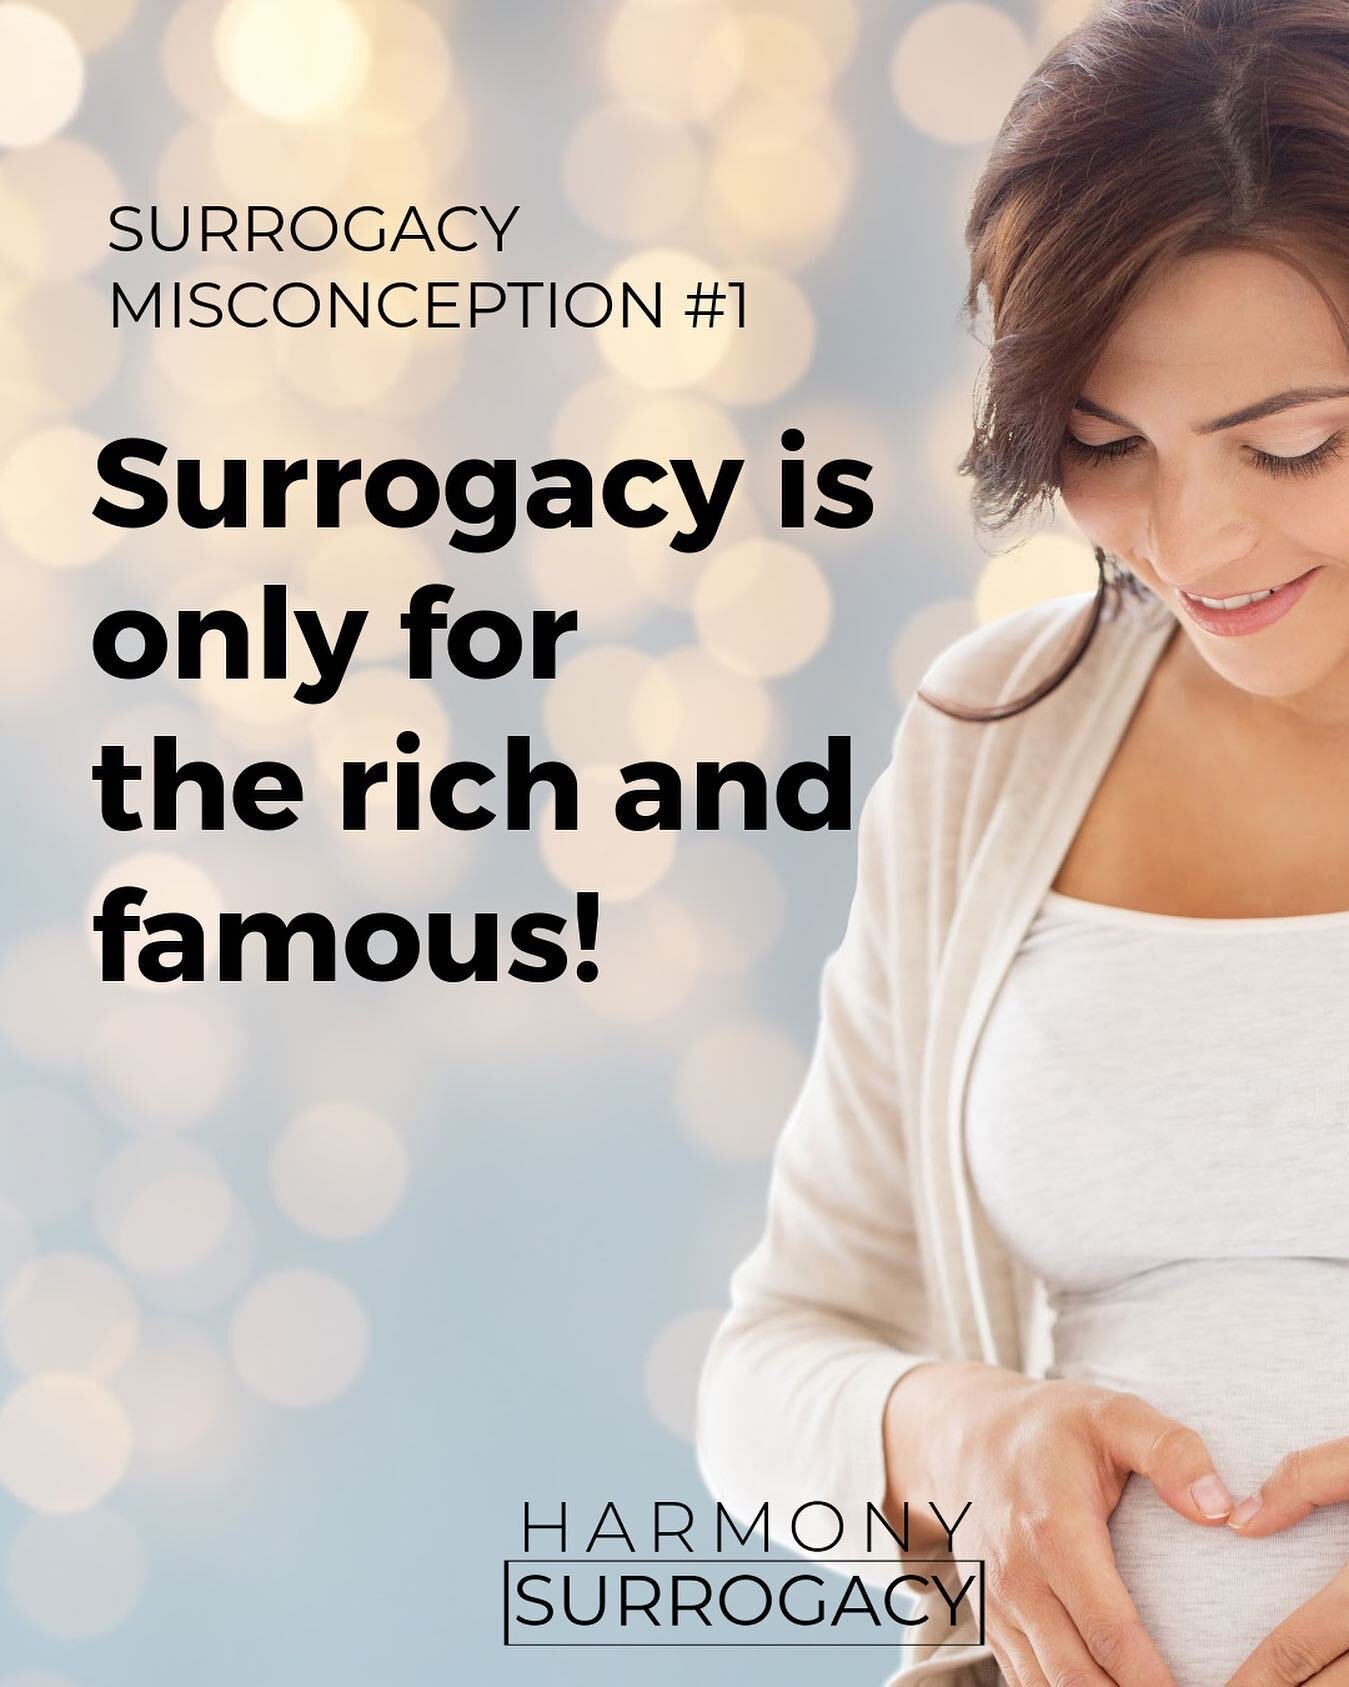 While surrogacy can be expensive, it&rsquo;s not exclusively for celebrities or the very wealthy. There are various financing options and arrangements that can make it more accessible for many people. Click the link in our bio to learn more.